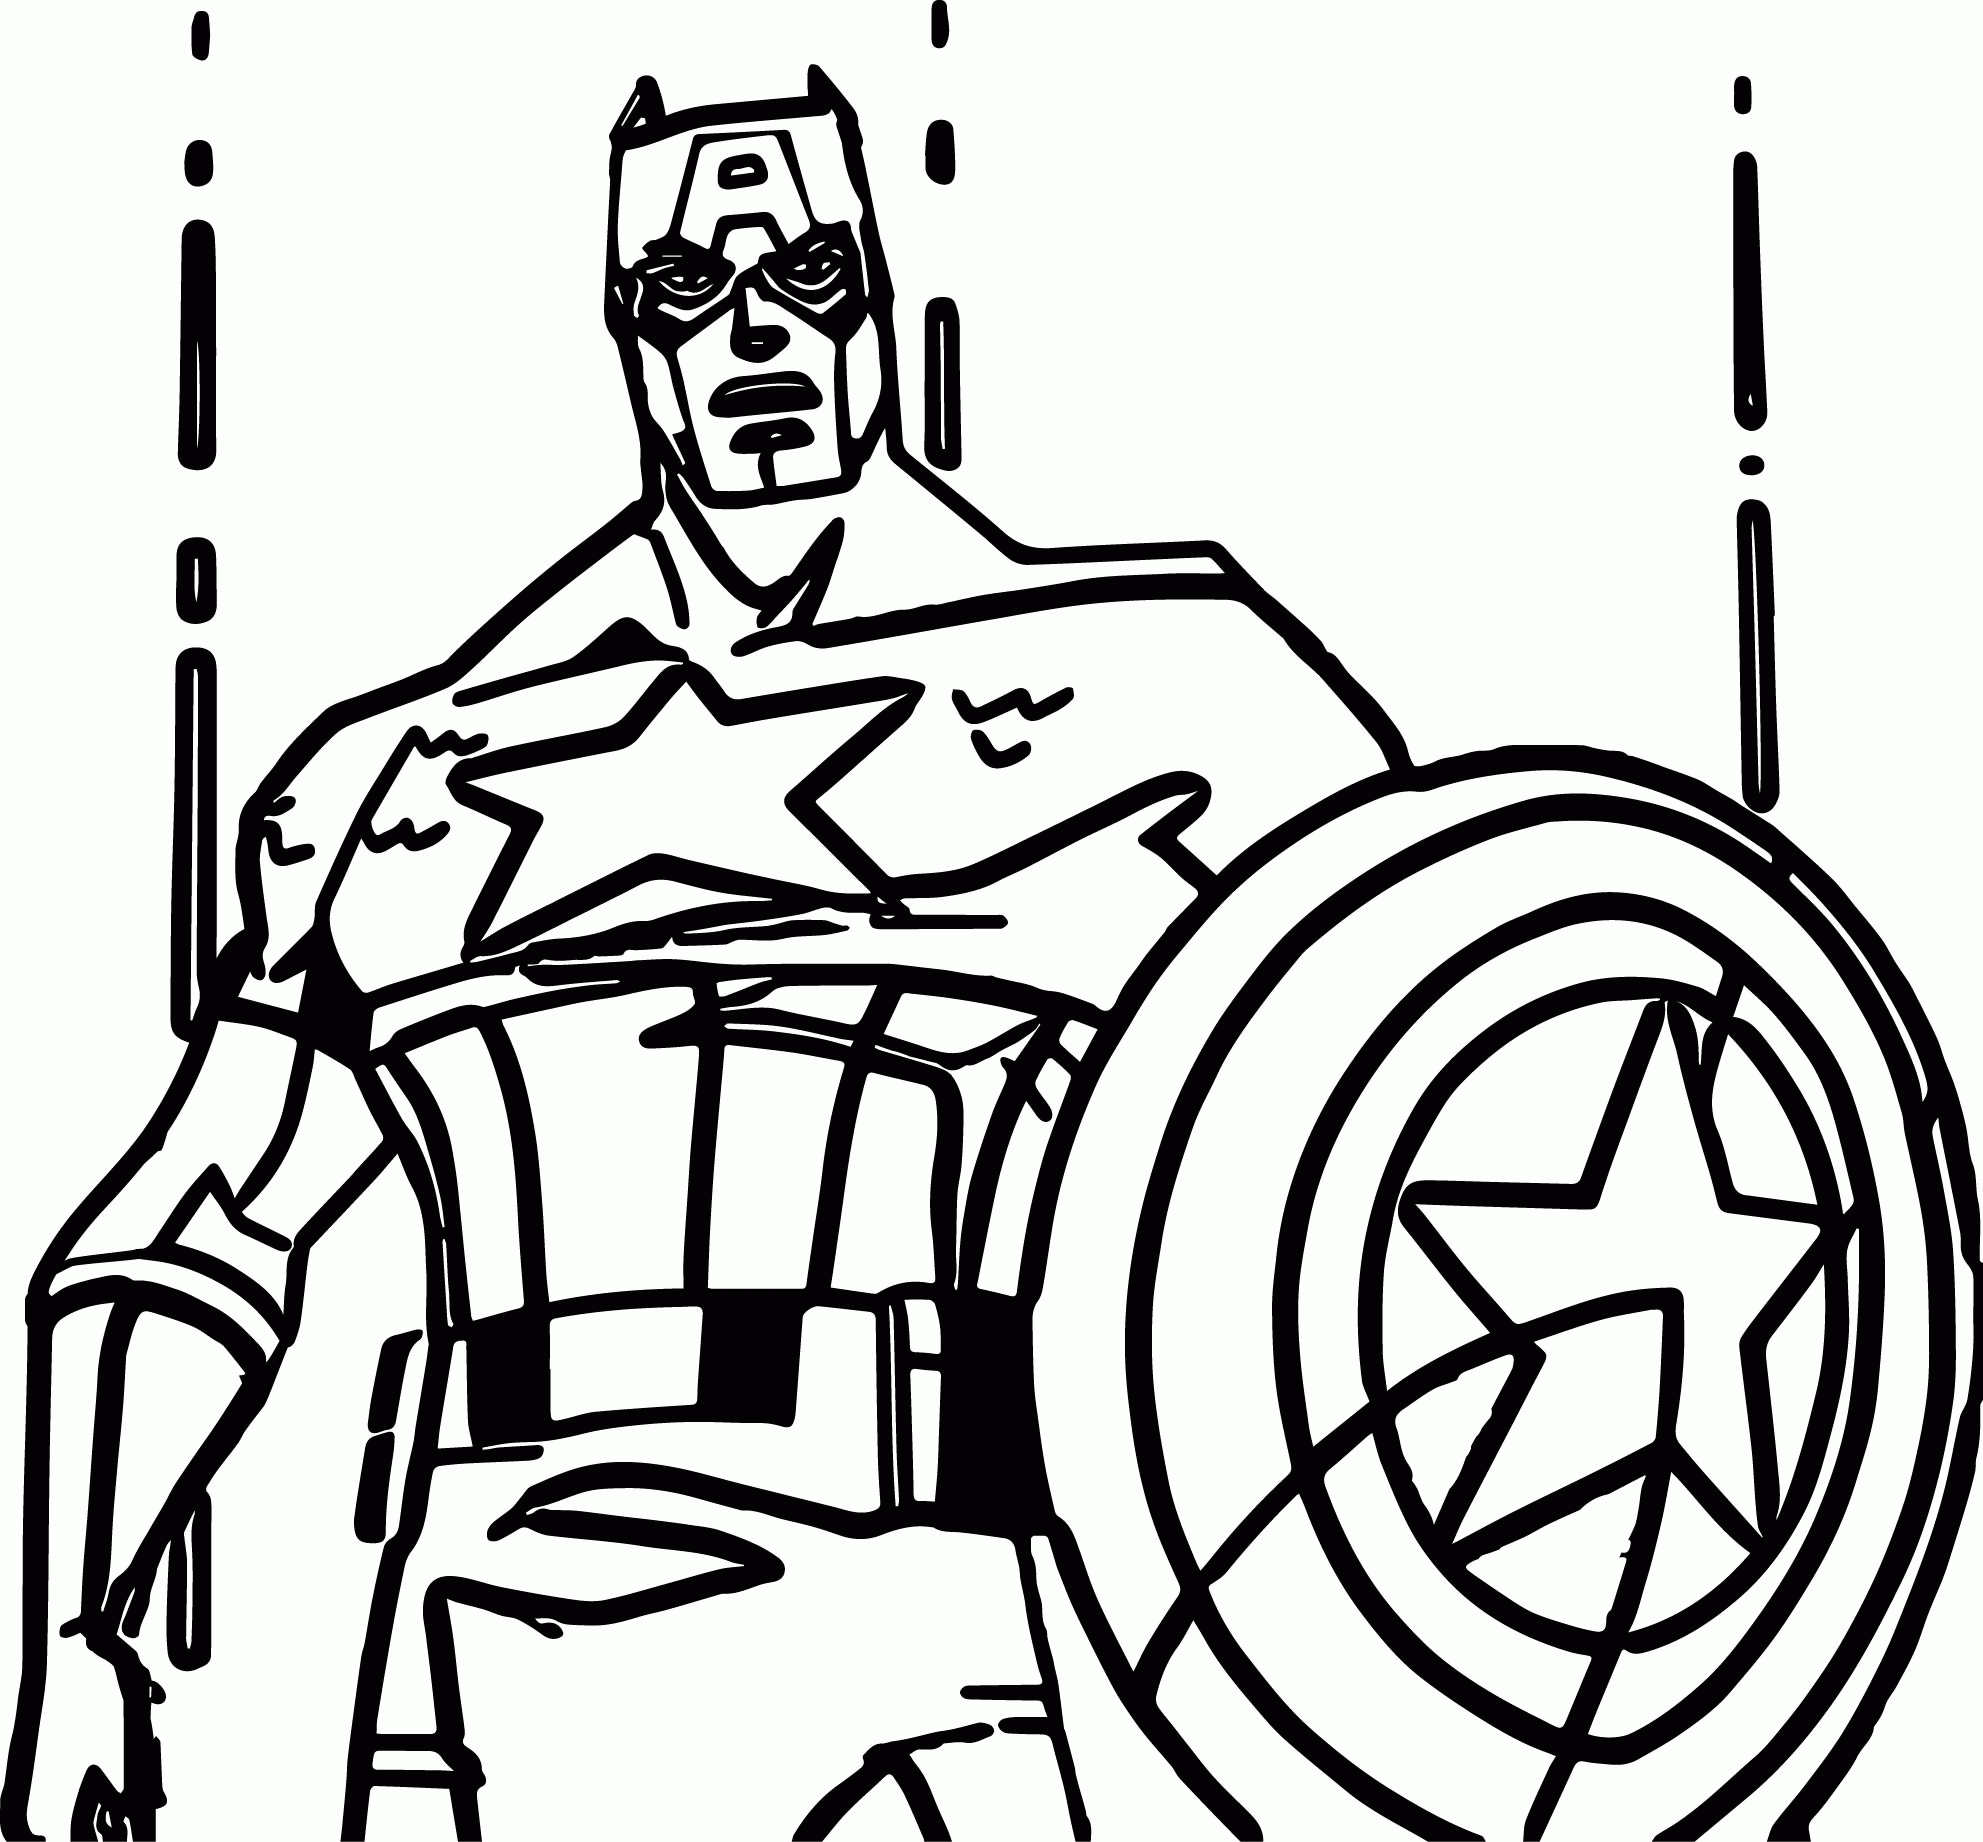 Captain_america_coloring_page_03 | Wecoloringpage